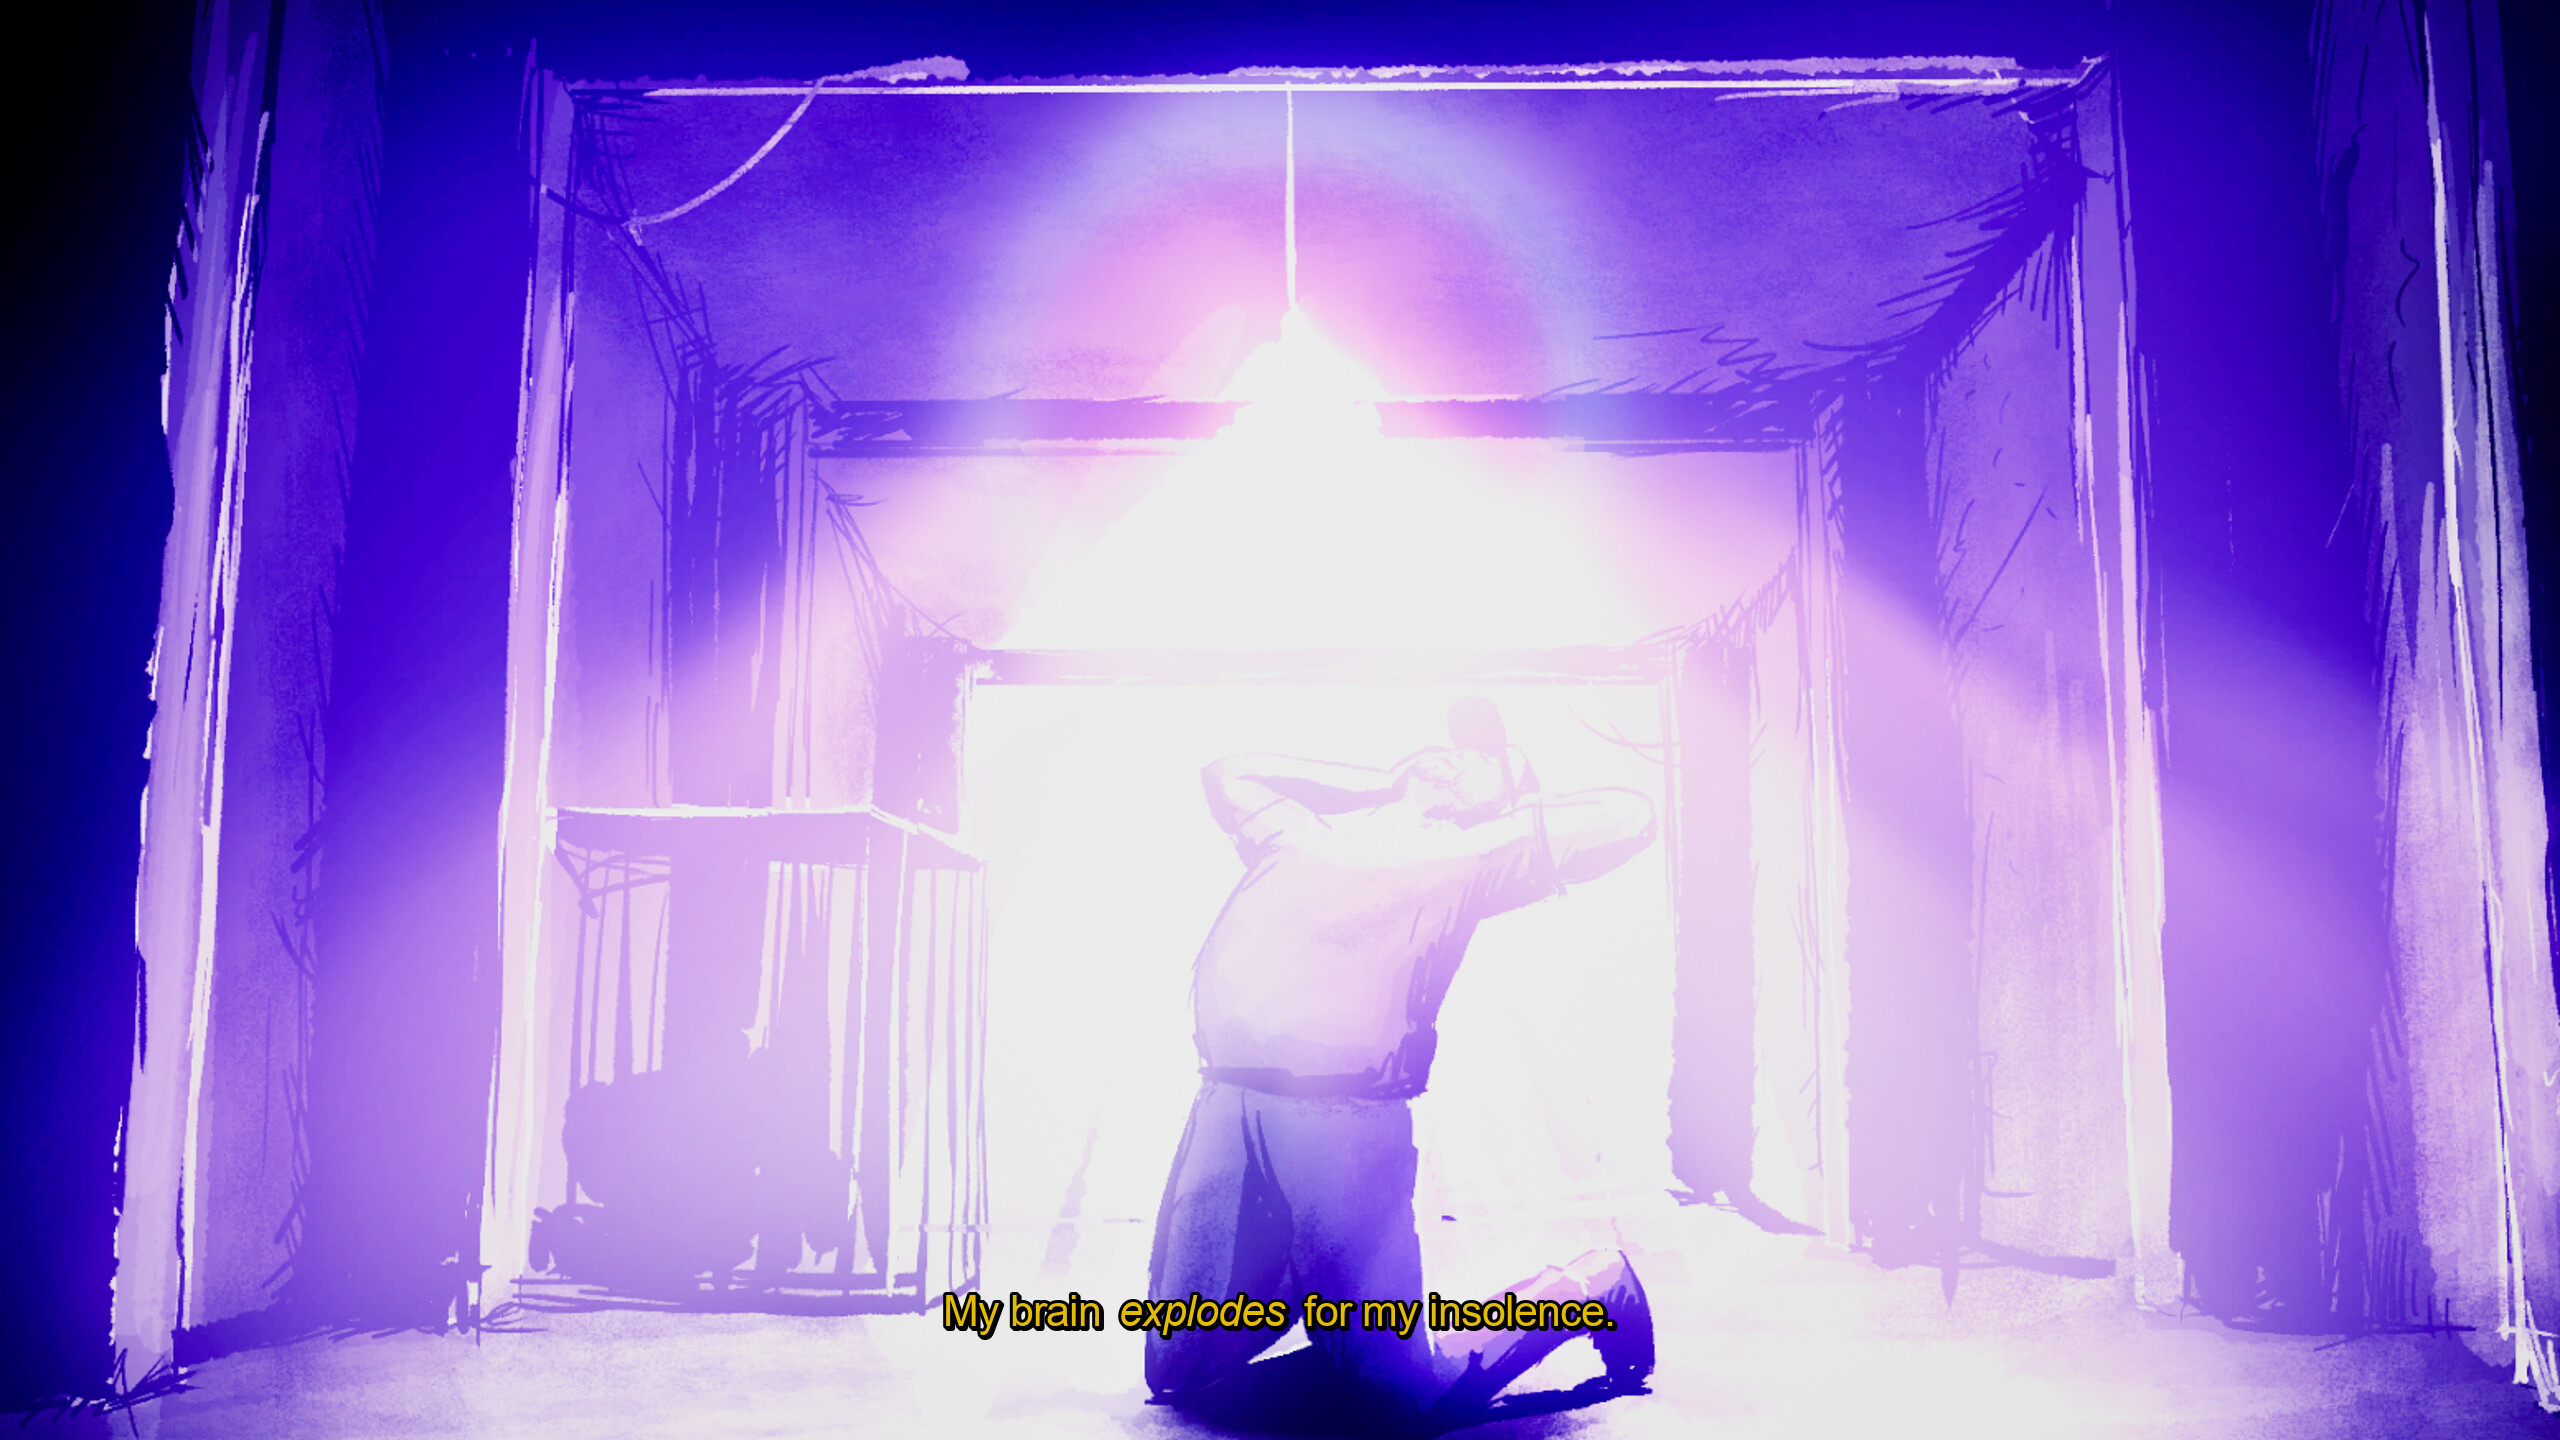 A man falls to his knees, clutching his head in agony, under a bright purple light in the game Life Eater. There’s a caption that reads “My brain explodes for my insolence”